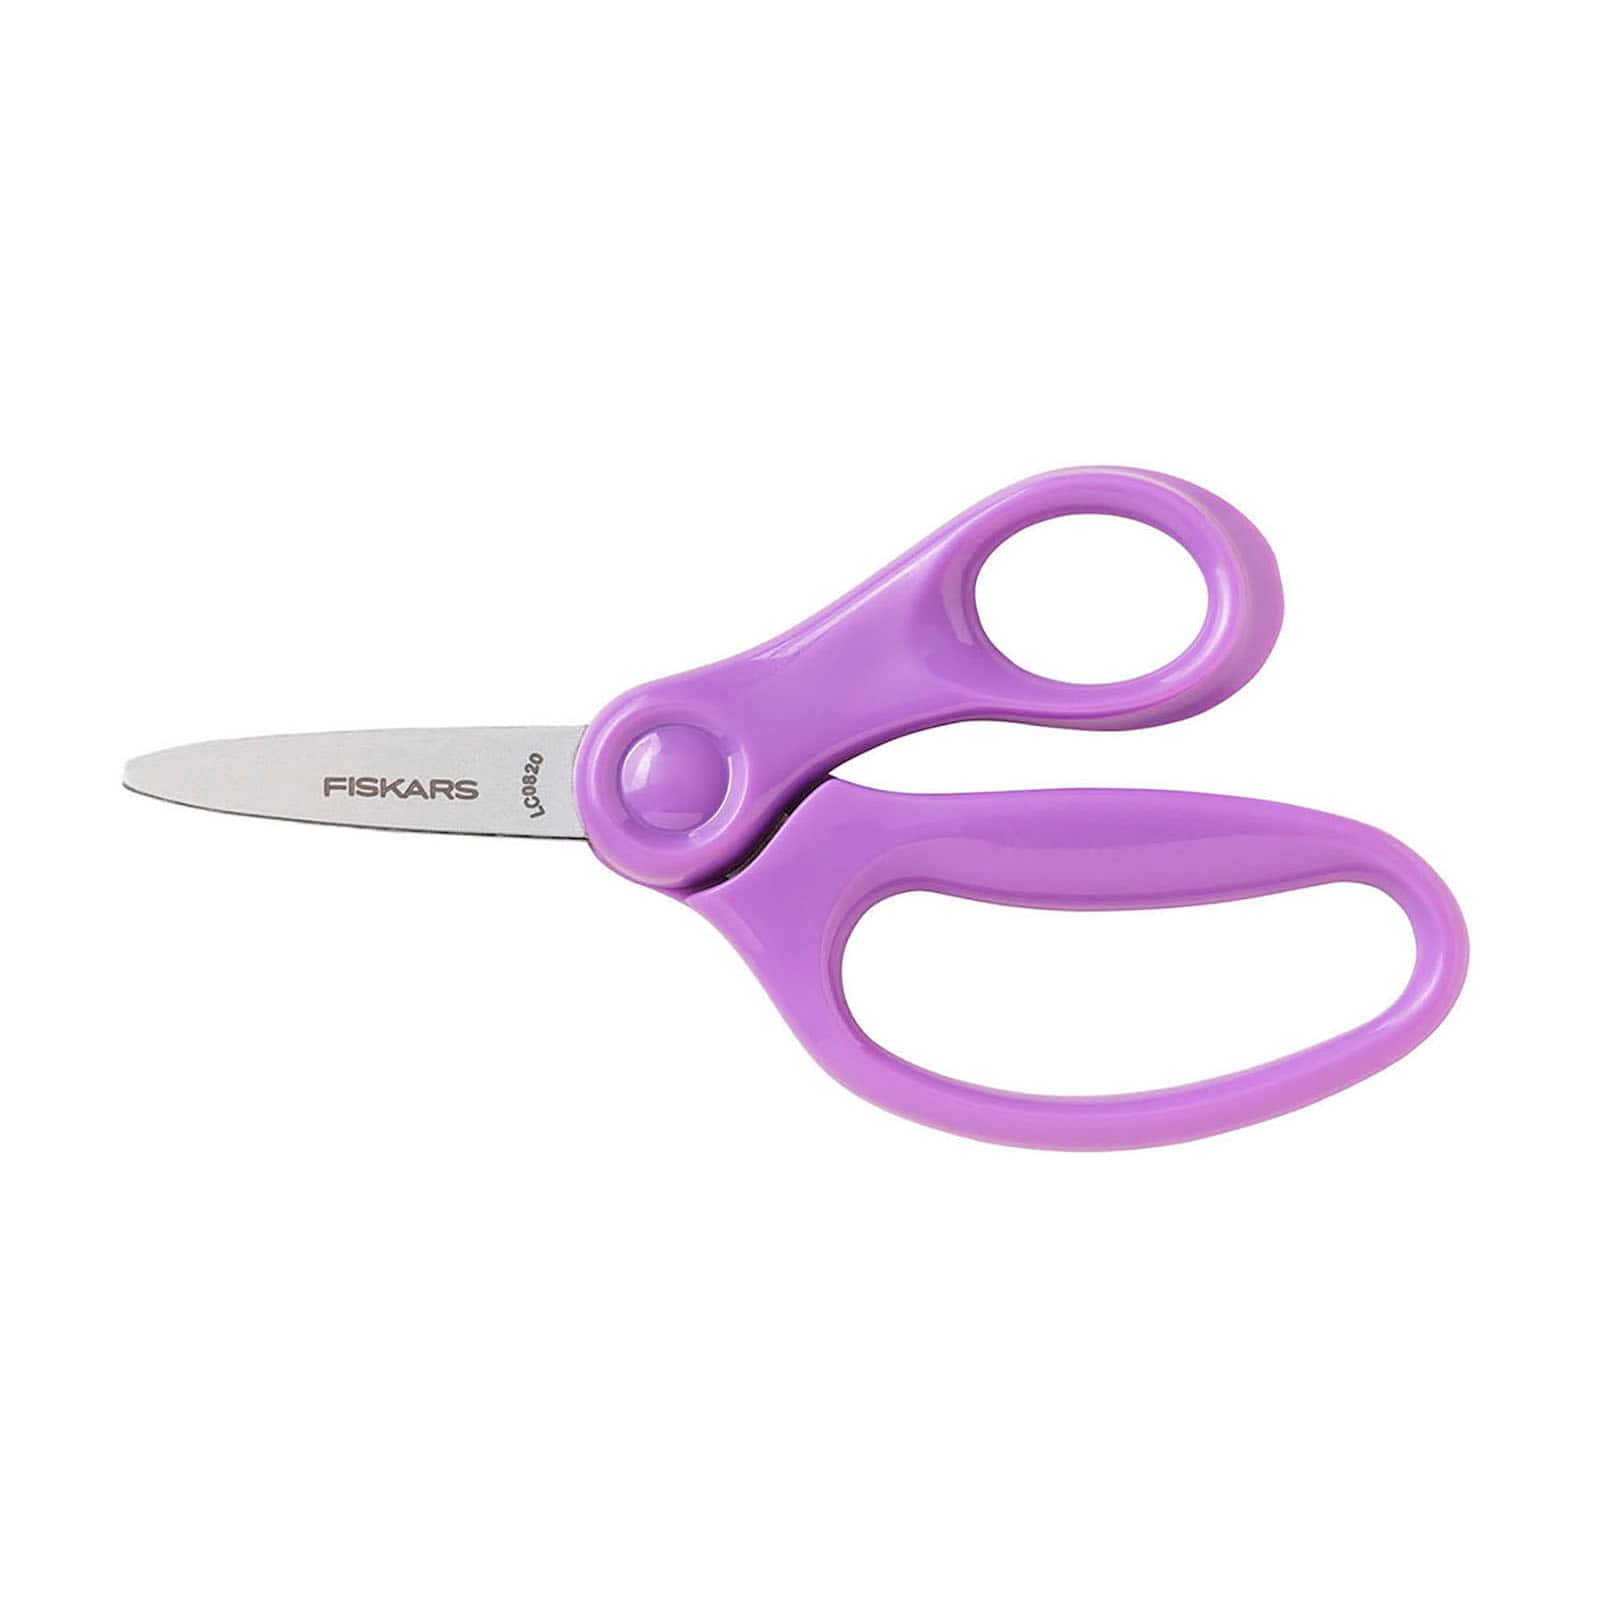 Westcott 15967 Right- and Left-Handed Scissors, Classic Kids' Scissors,  Ages 4-8, 5-Inch Blunt Tip, Neon Pink